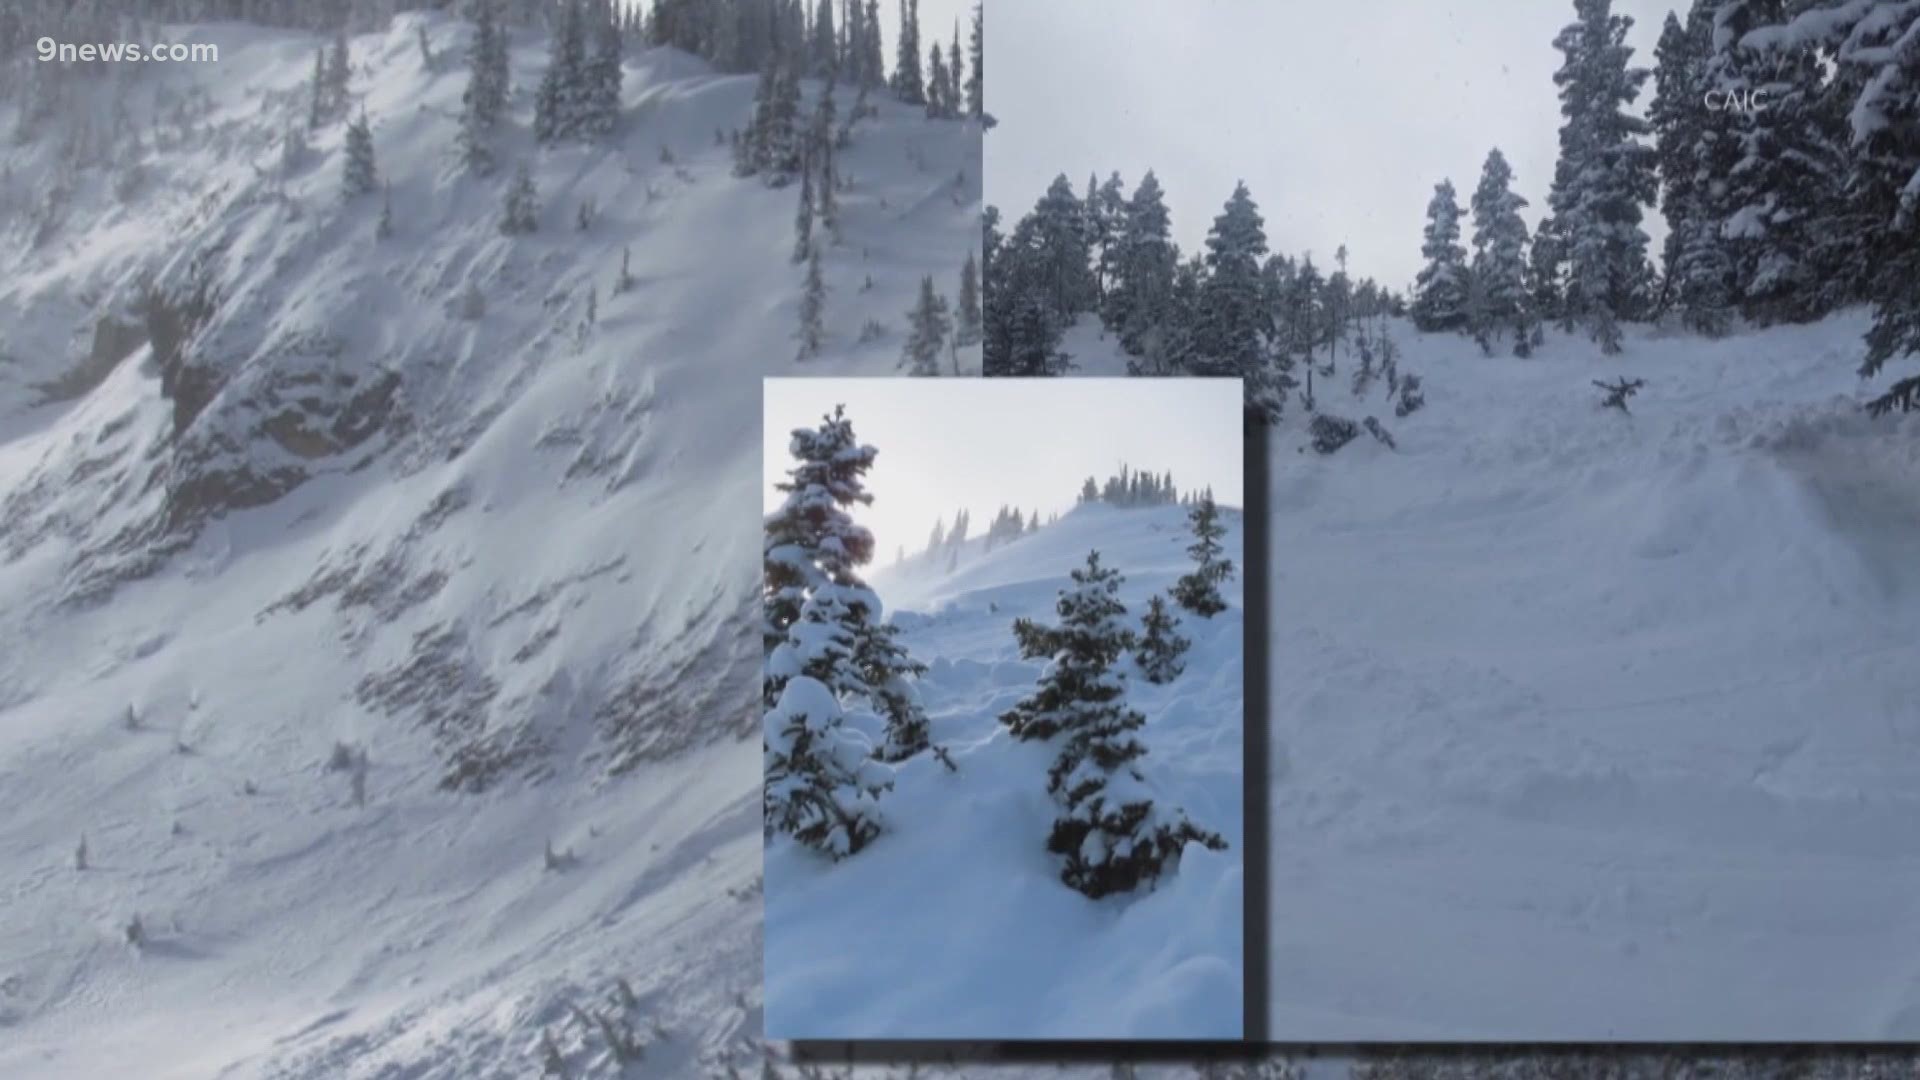 The three men were killed in an avalanche near Silverton on Monday.